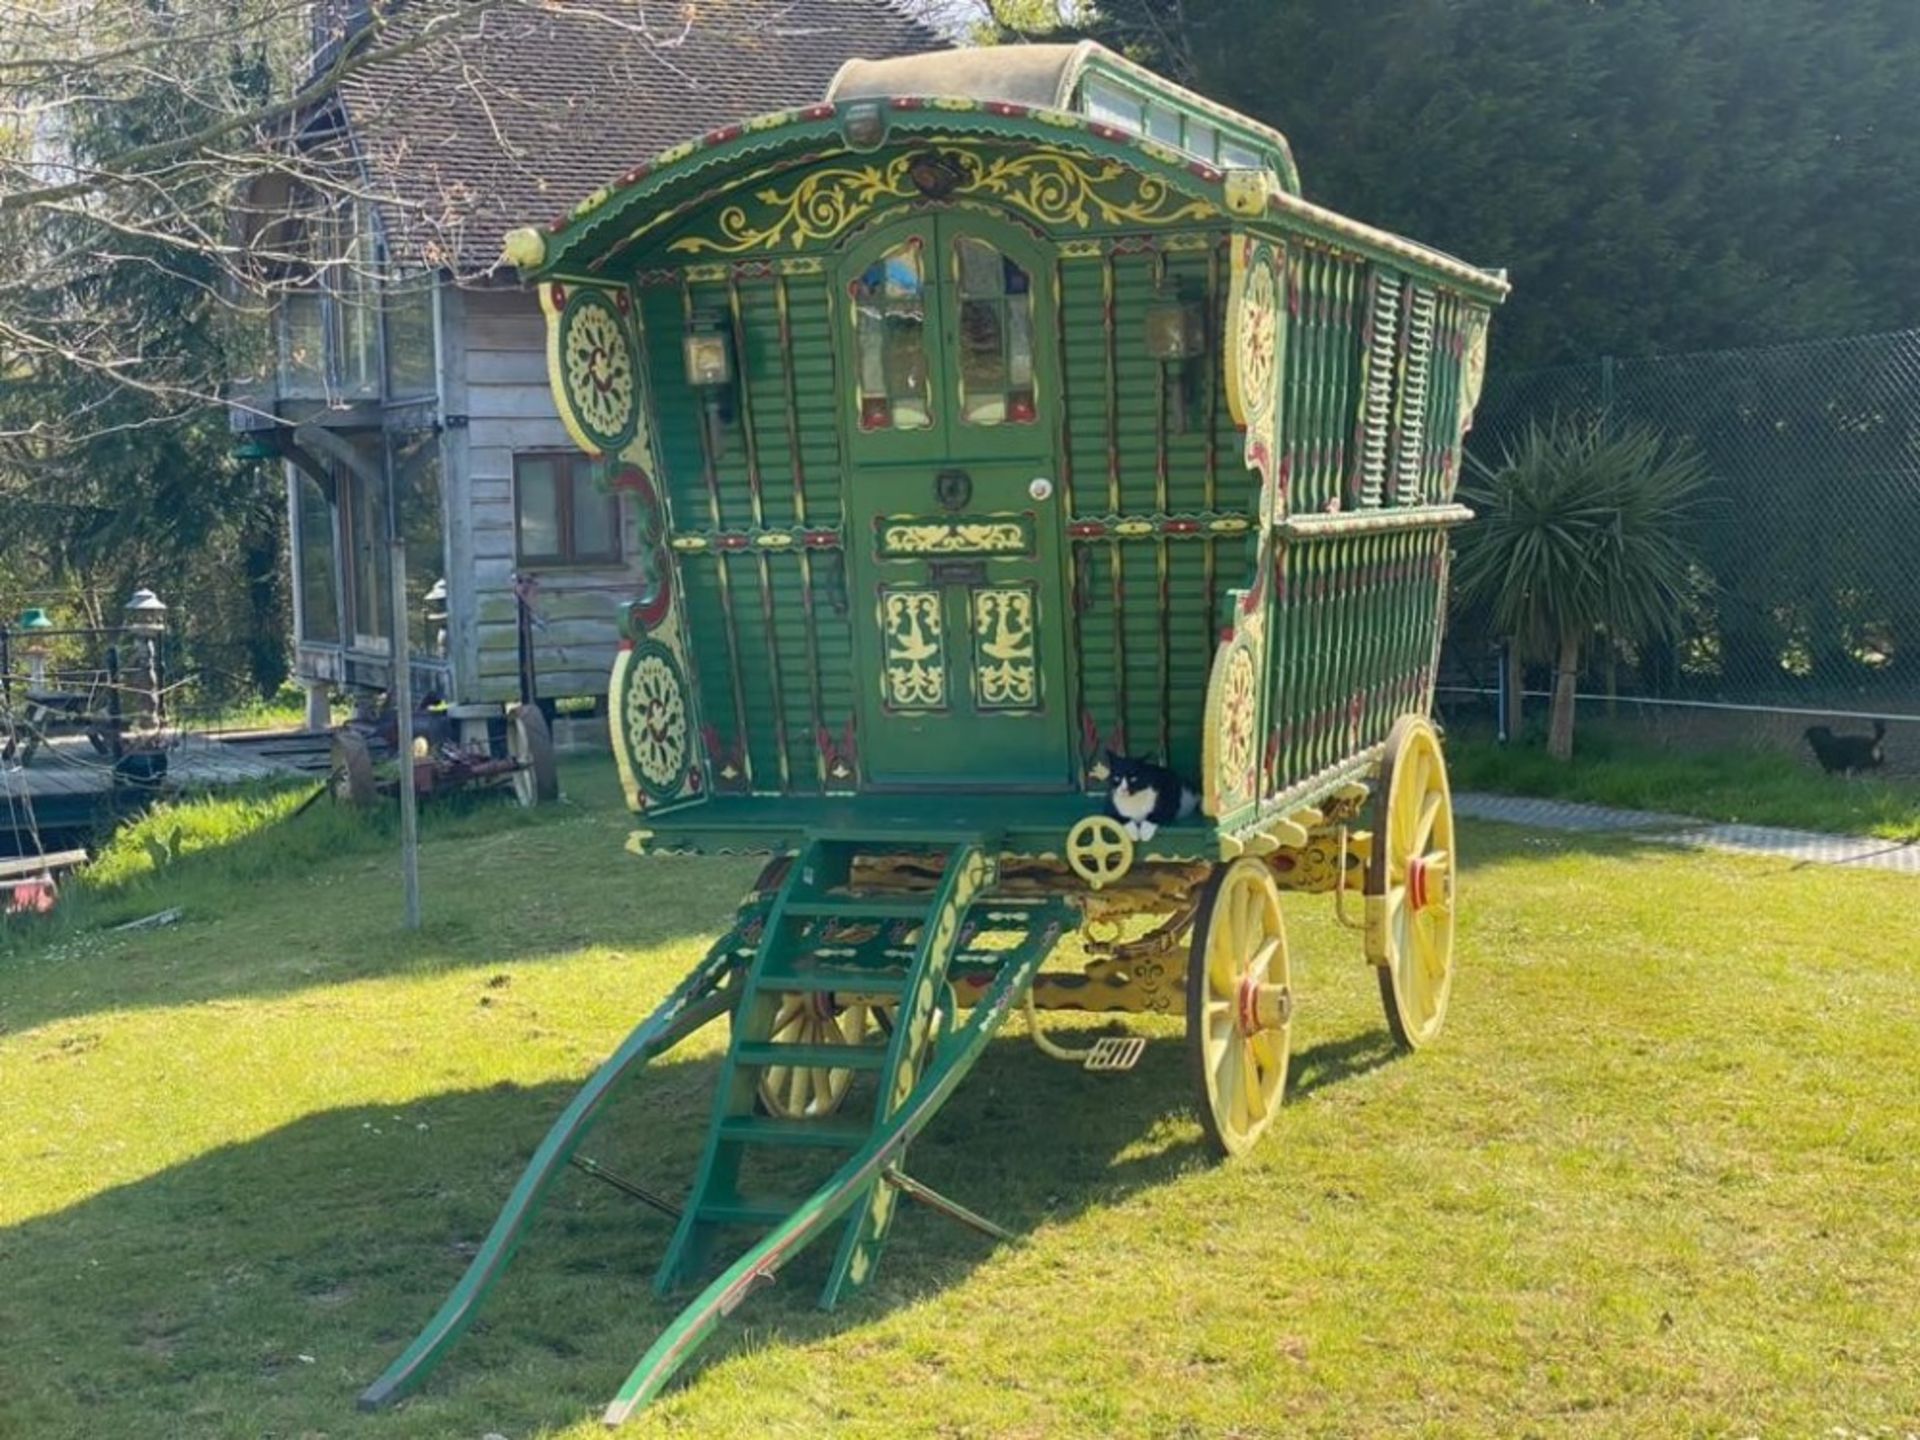 READING DUNTON WAGON, painted green with cream and red decoration